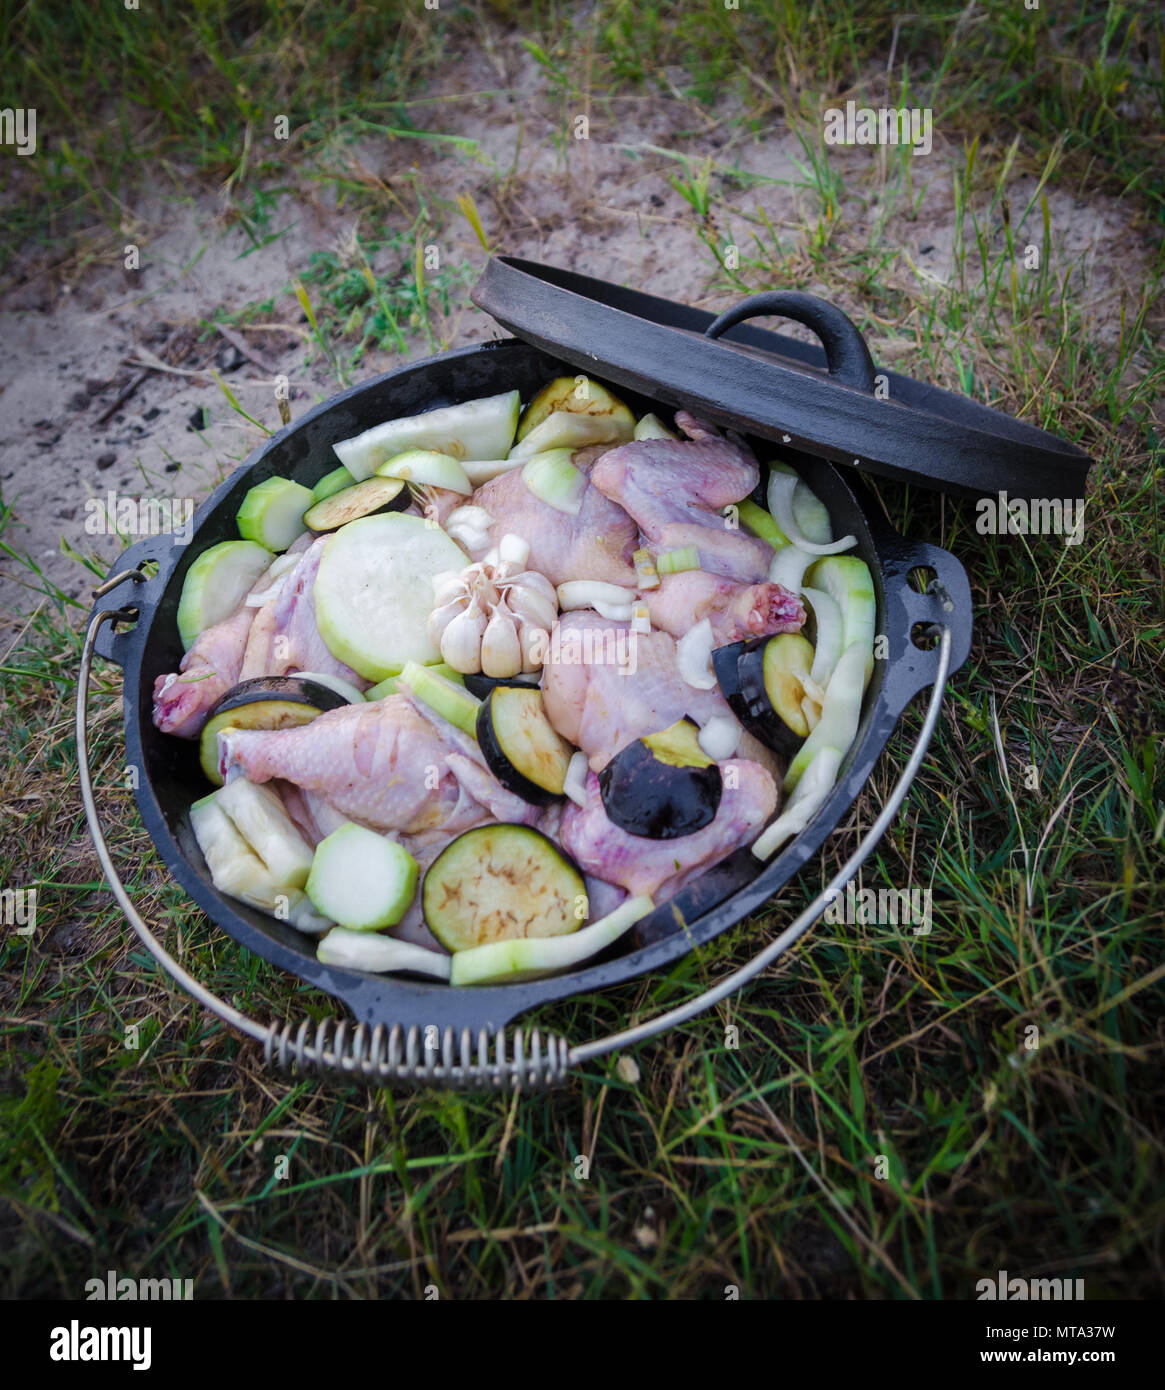 https://c8.alamy.com/comp/MTA37W/fresh-chicken-aubergine-and-sqaush-stew-in-cast-iron-pot-or-dutch-oven-to-be-cooked-on-campfire-MTA37W.jpg